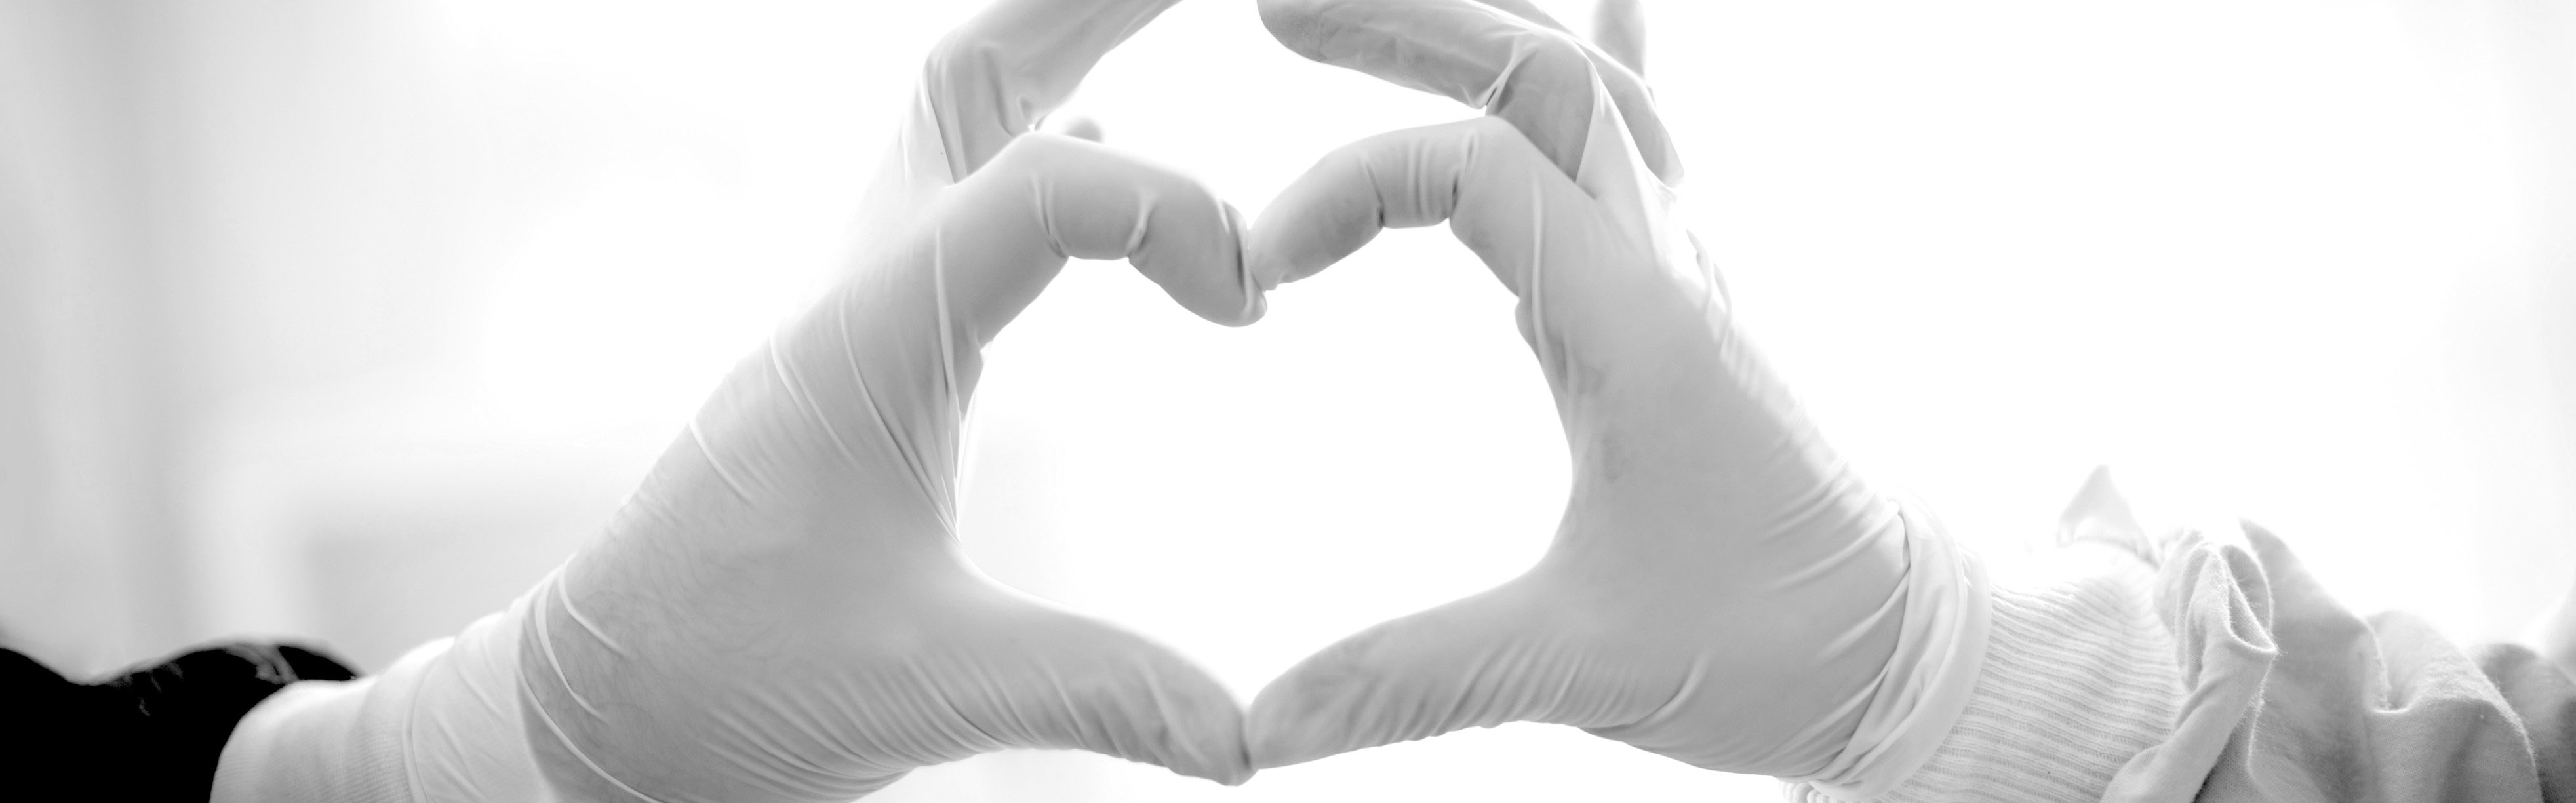 Healthcare workers hold up gloved hands to make a heart.